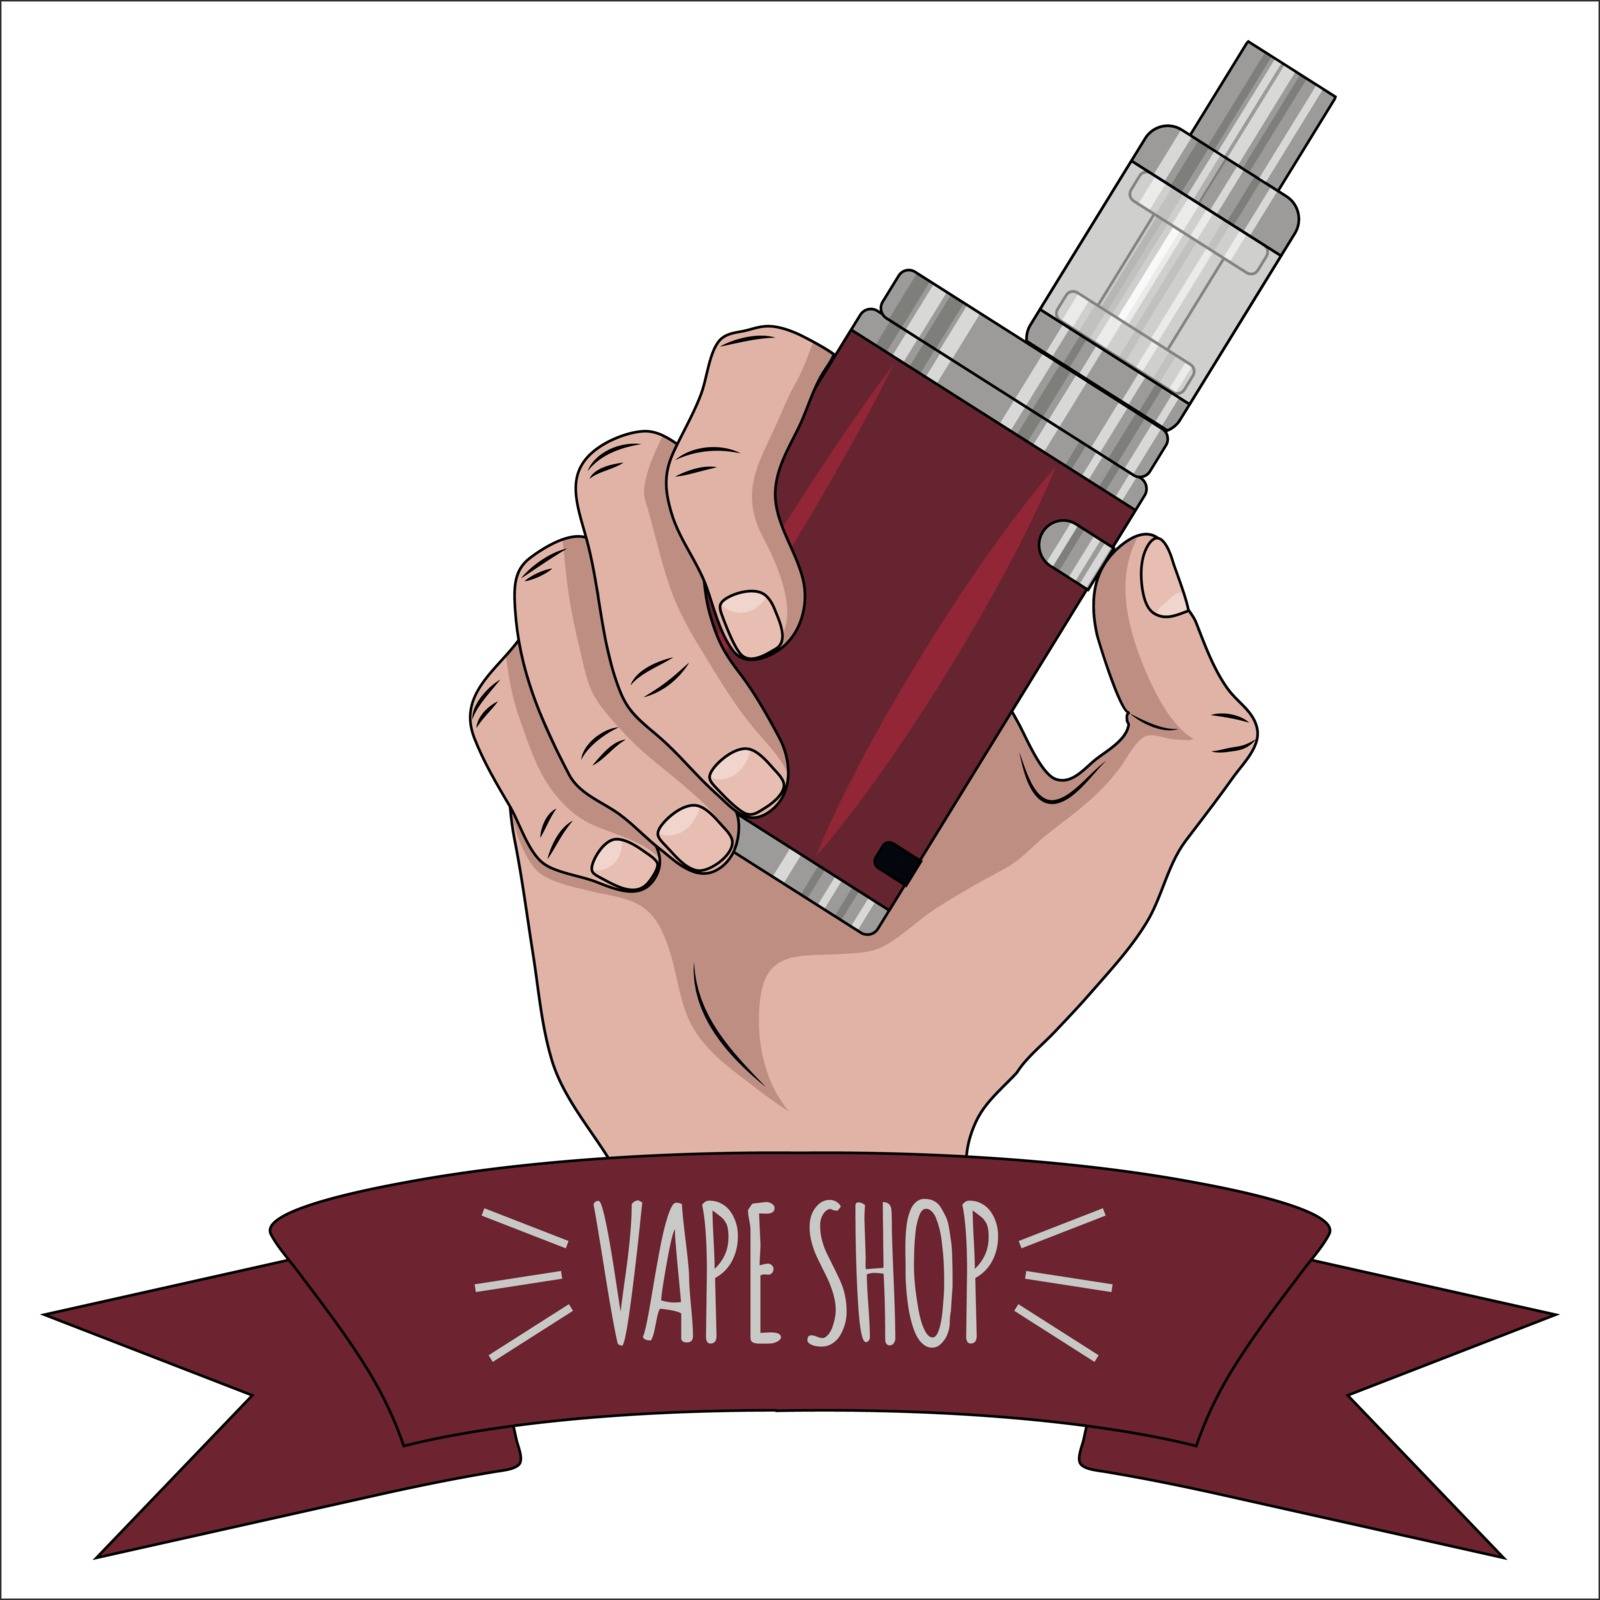 Vape Shop Icon And Letters by nutela_pancake